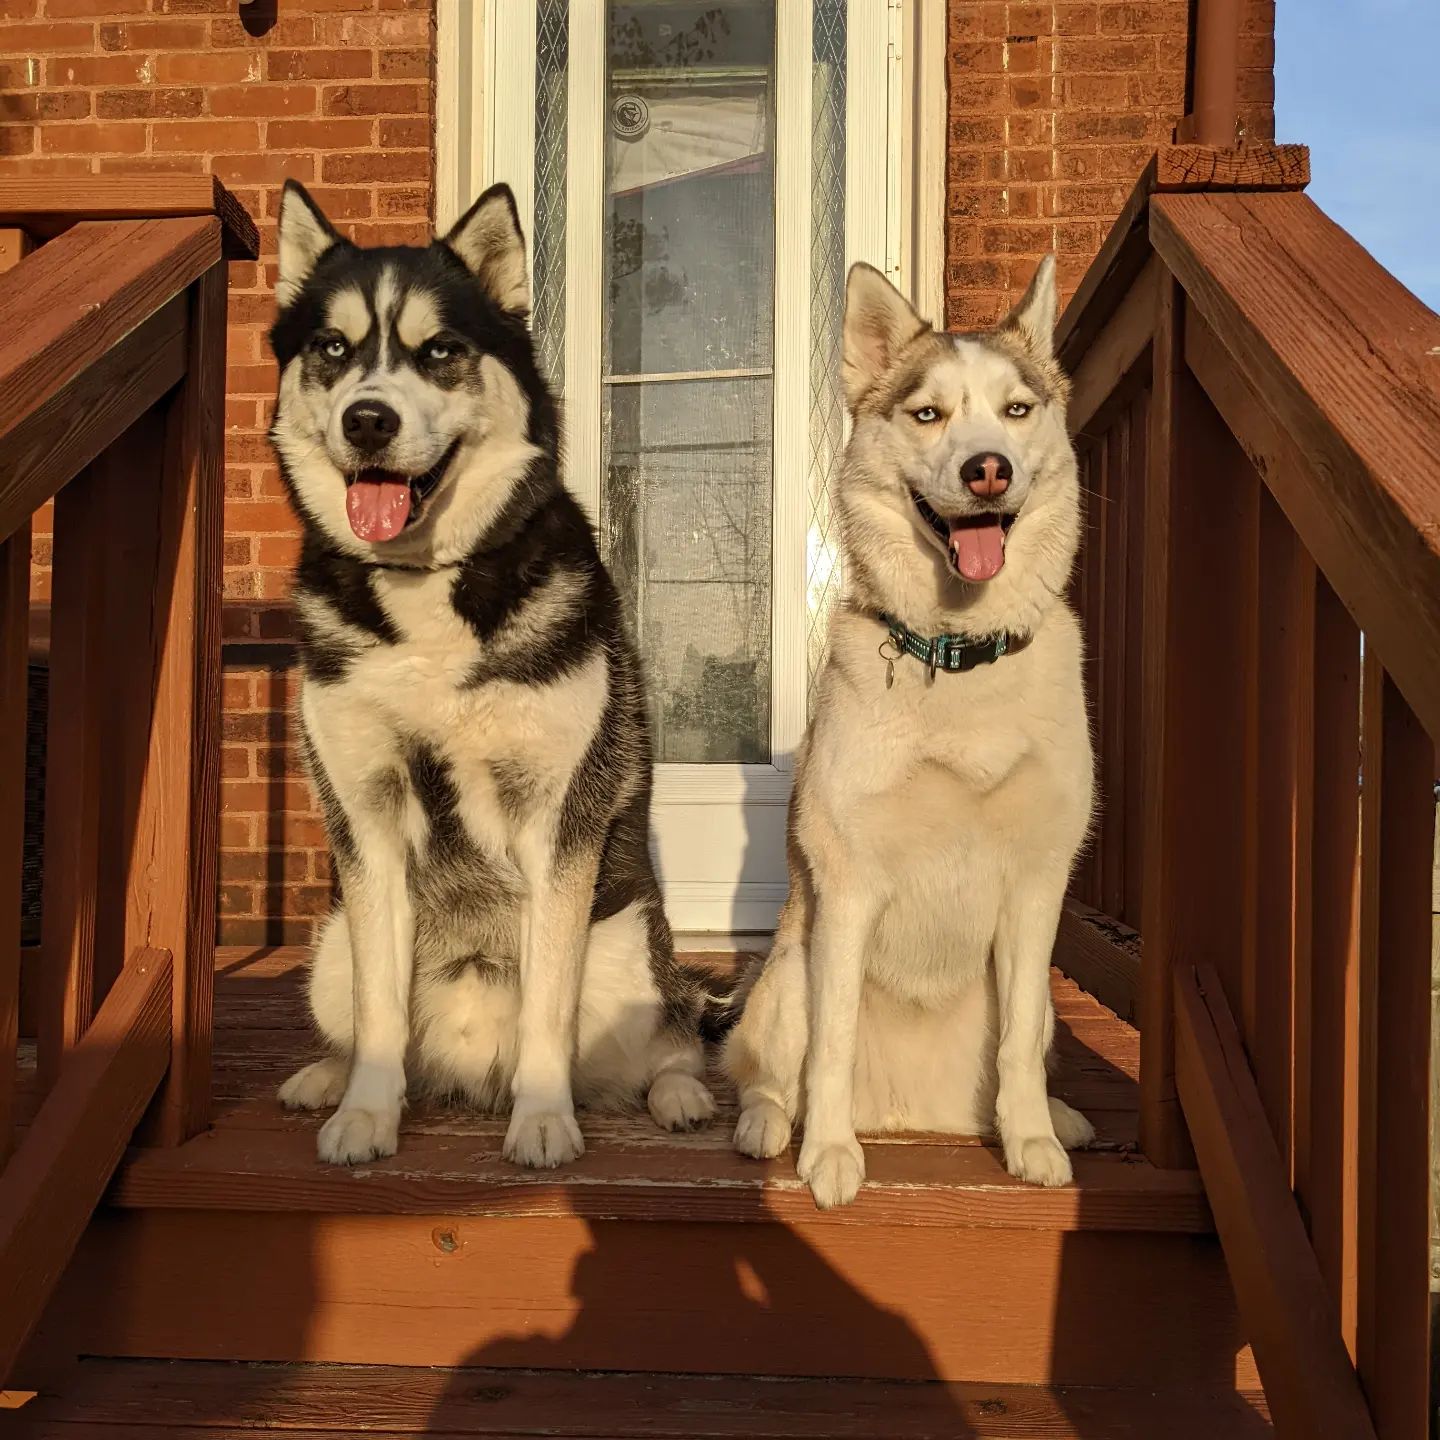 It's a day early, but happy 2 year gotcha day to these two darlings #stlnanuq #stlhuskymishka #siberianhusky #huskiesofinstagram